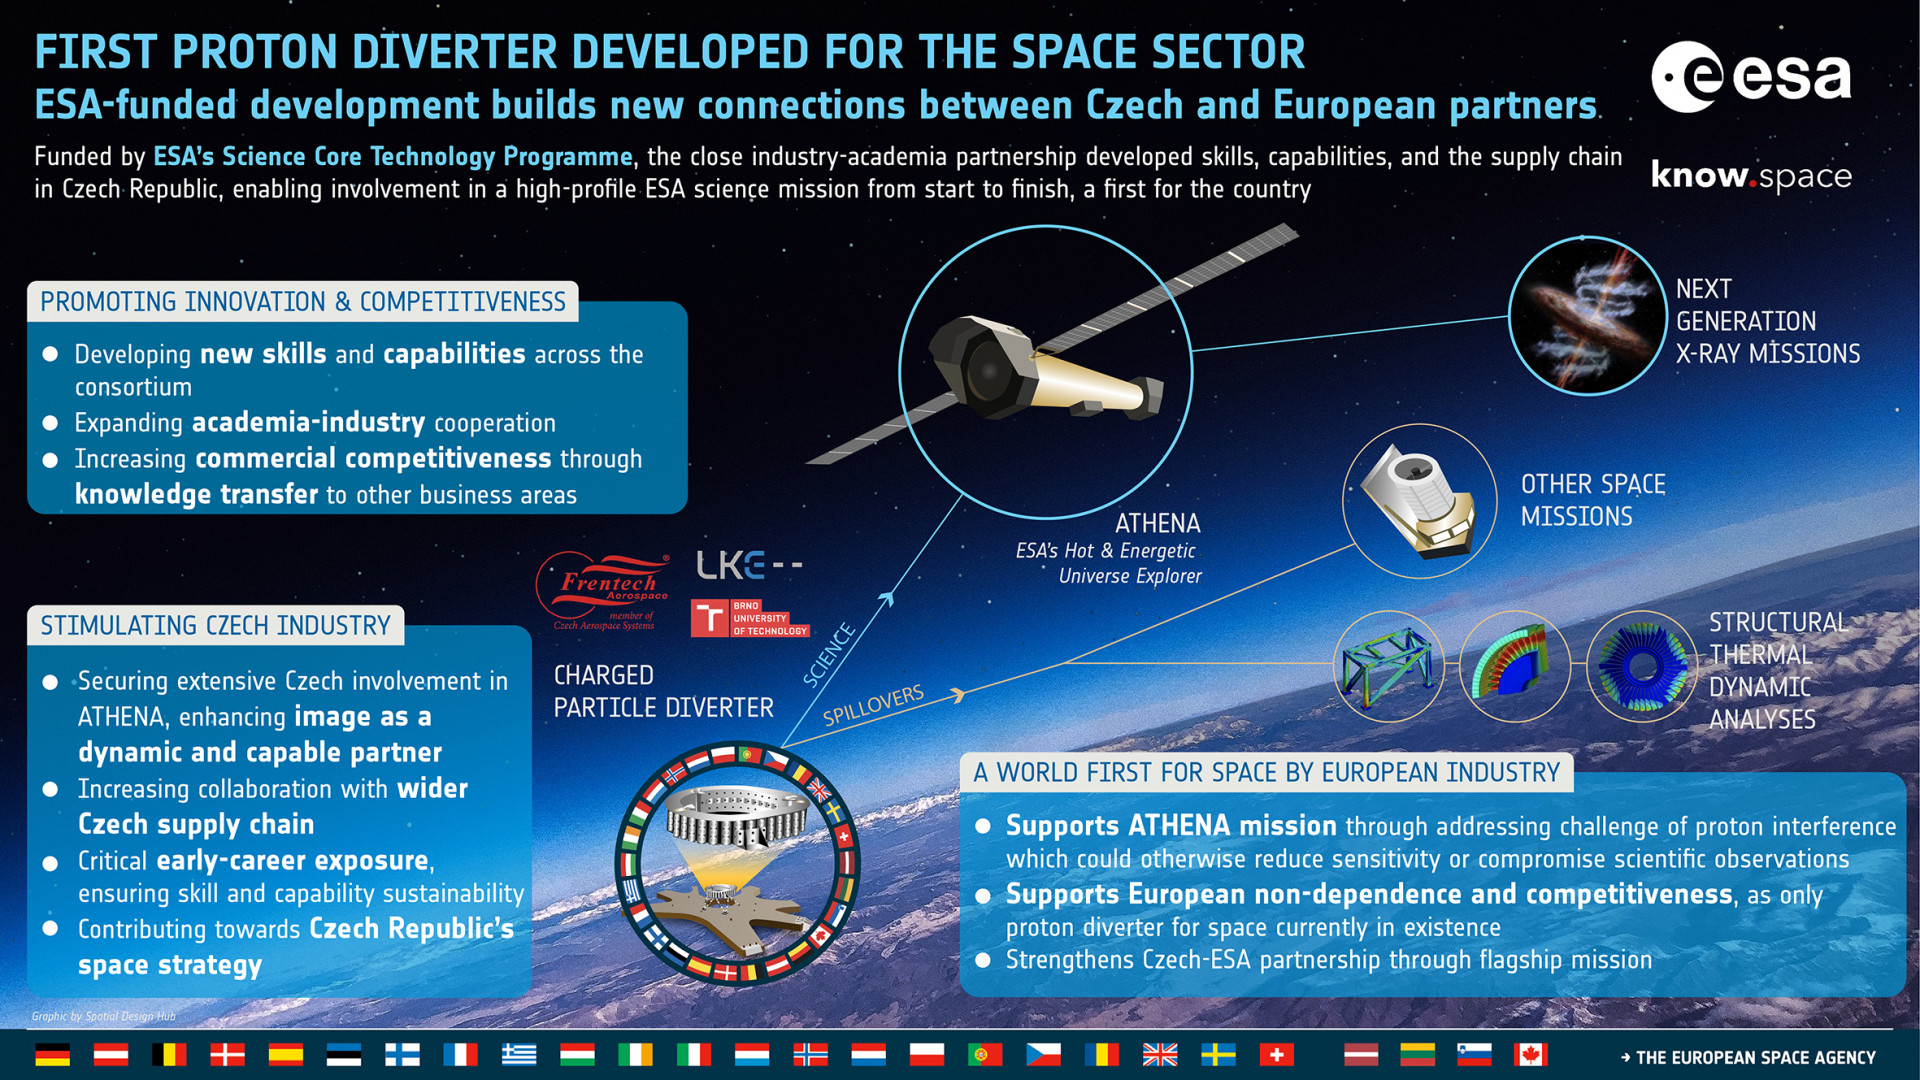 ESA Science Core Technology Development Success Story - First Proton Diverter Developed for the Space Sector